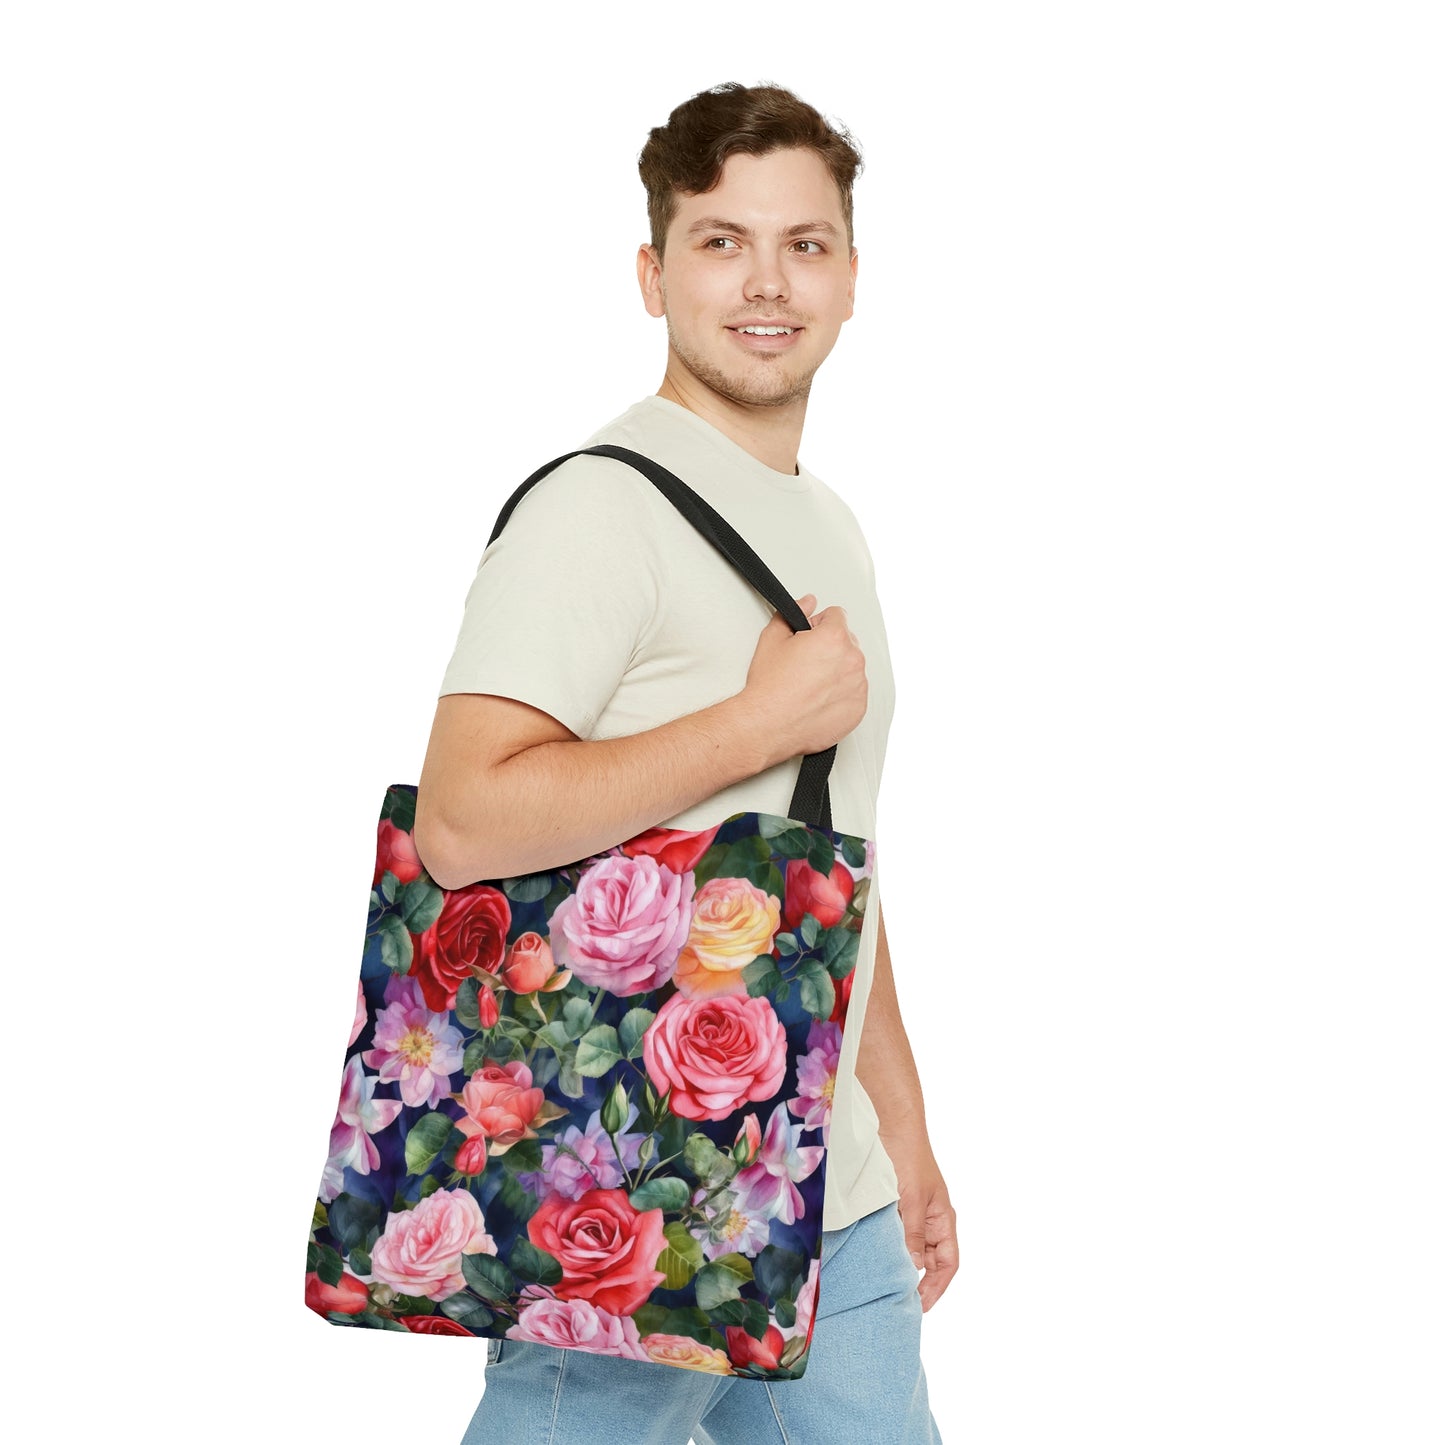 Roses In a Bunch Tote Bag